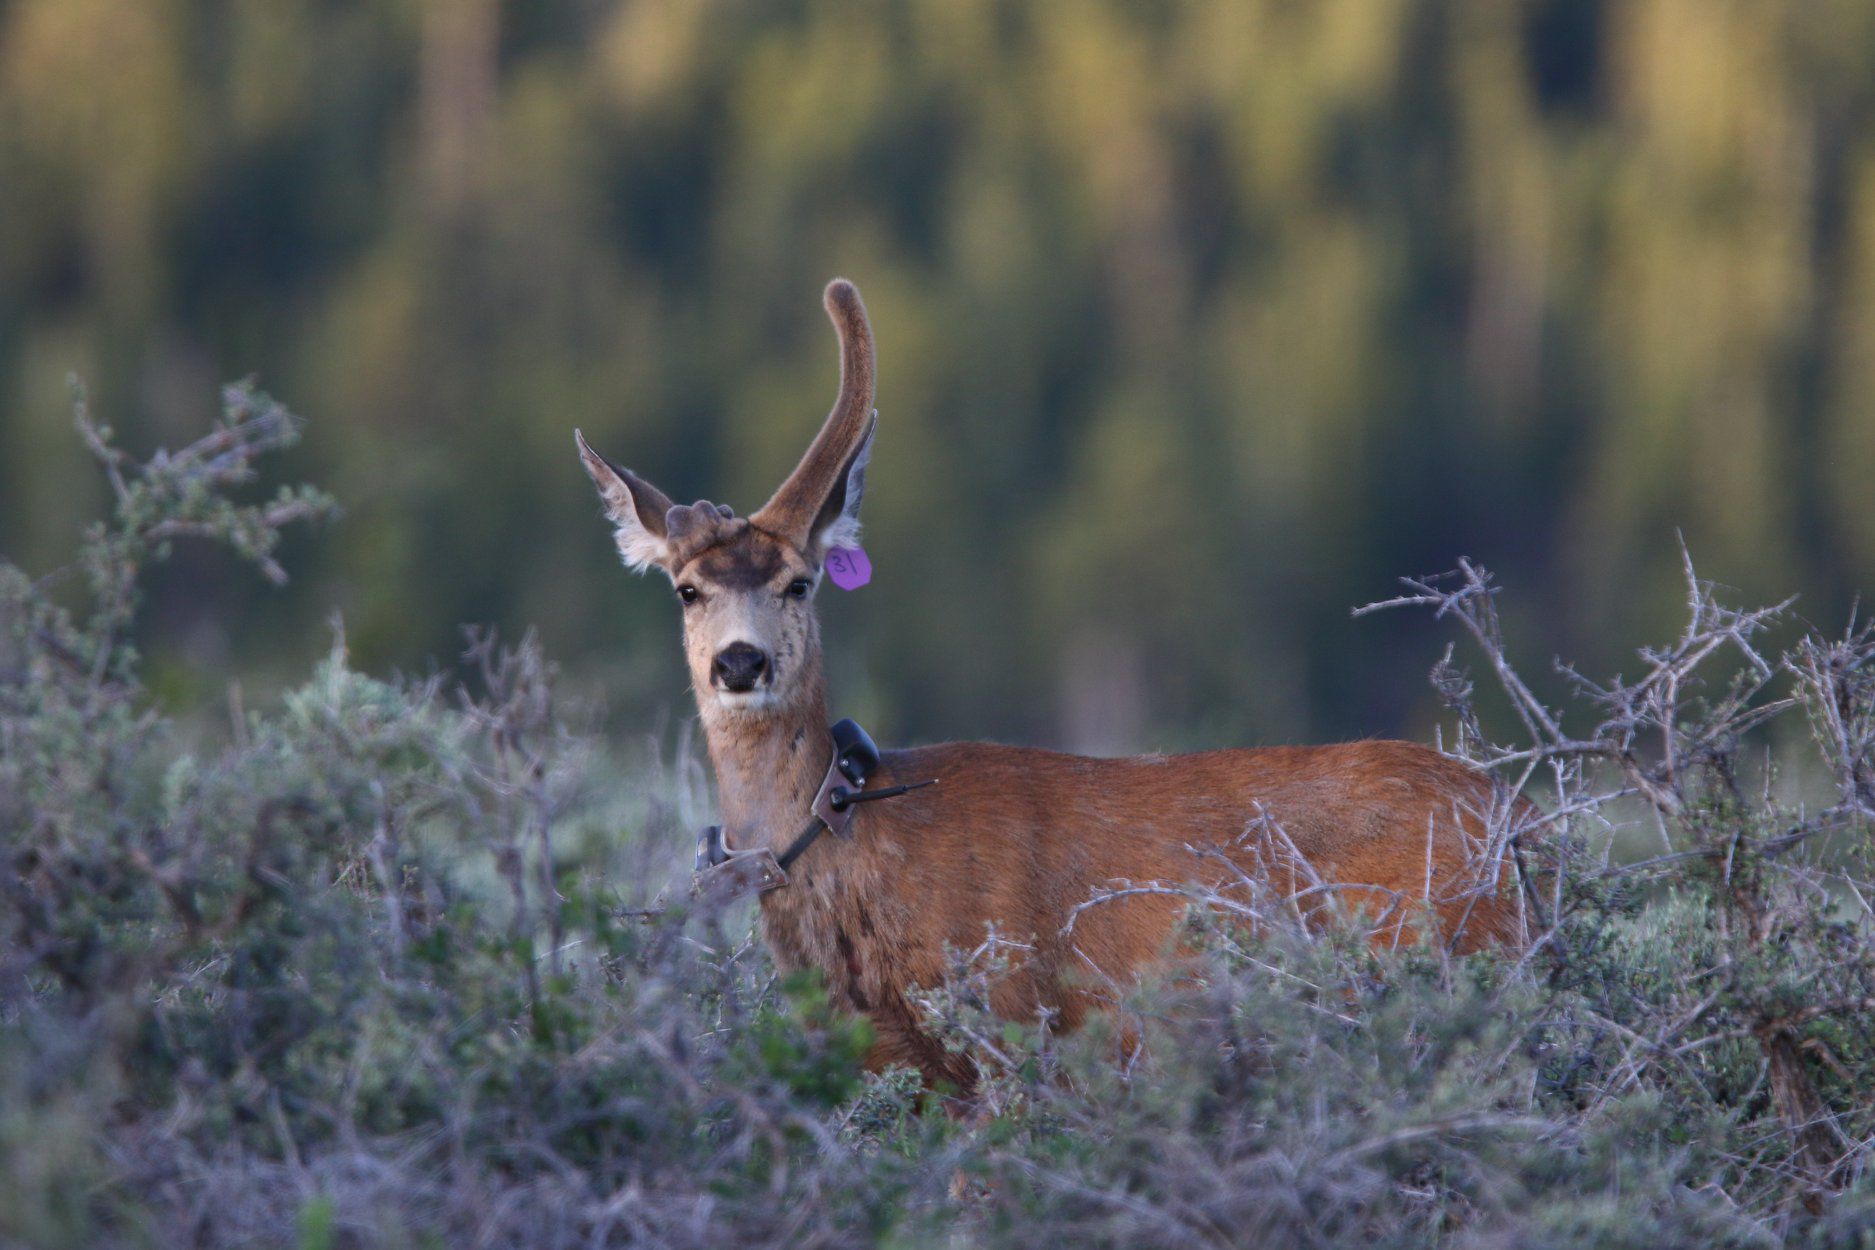 For one Utah deer living in trophy buck country, androgyny may be the key  to survival